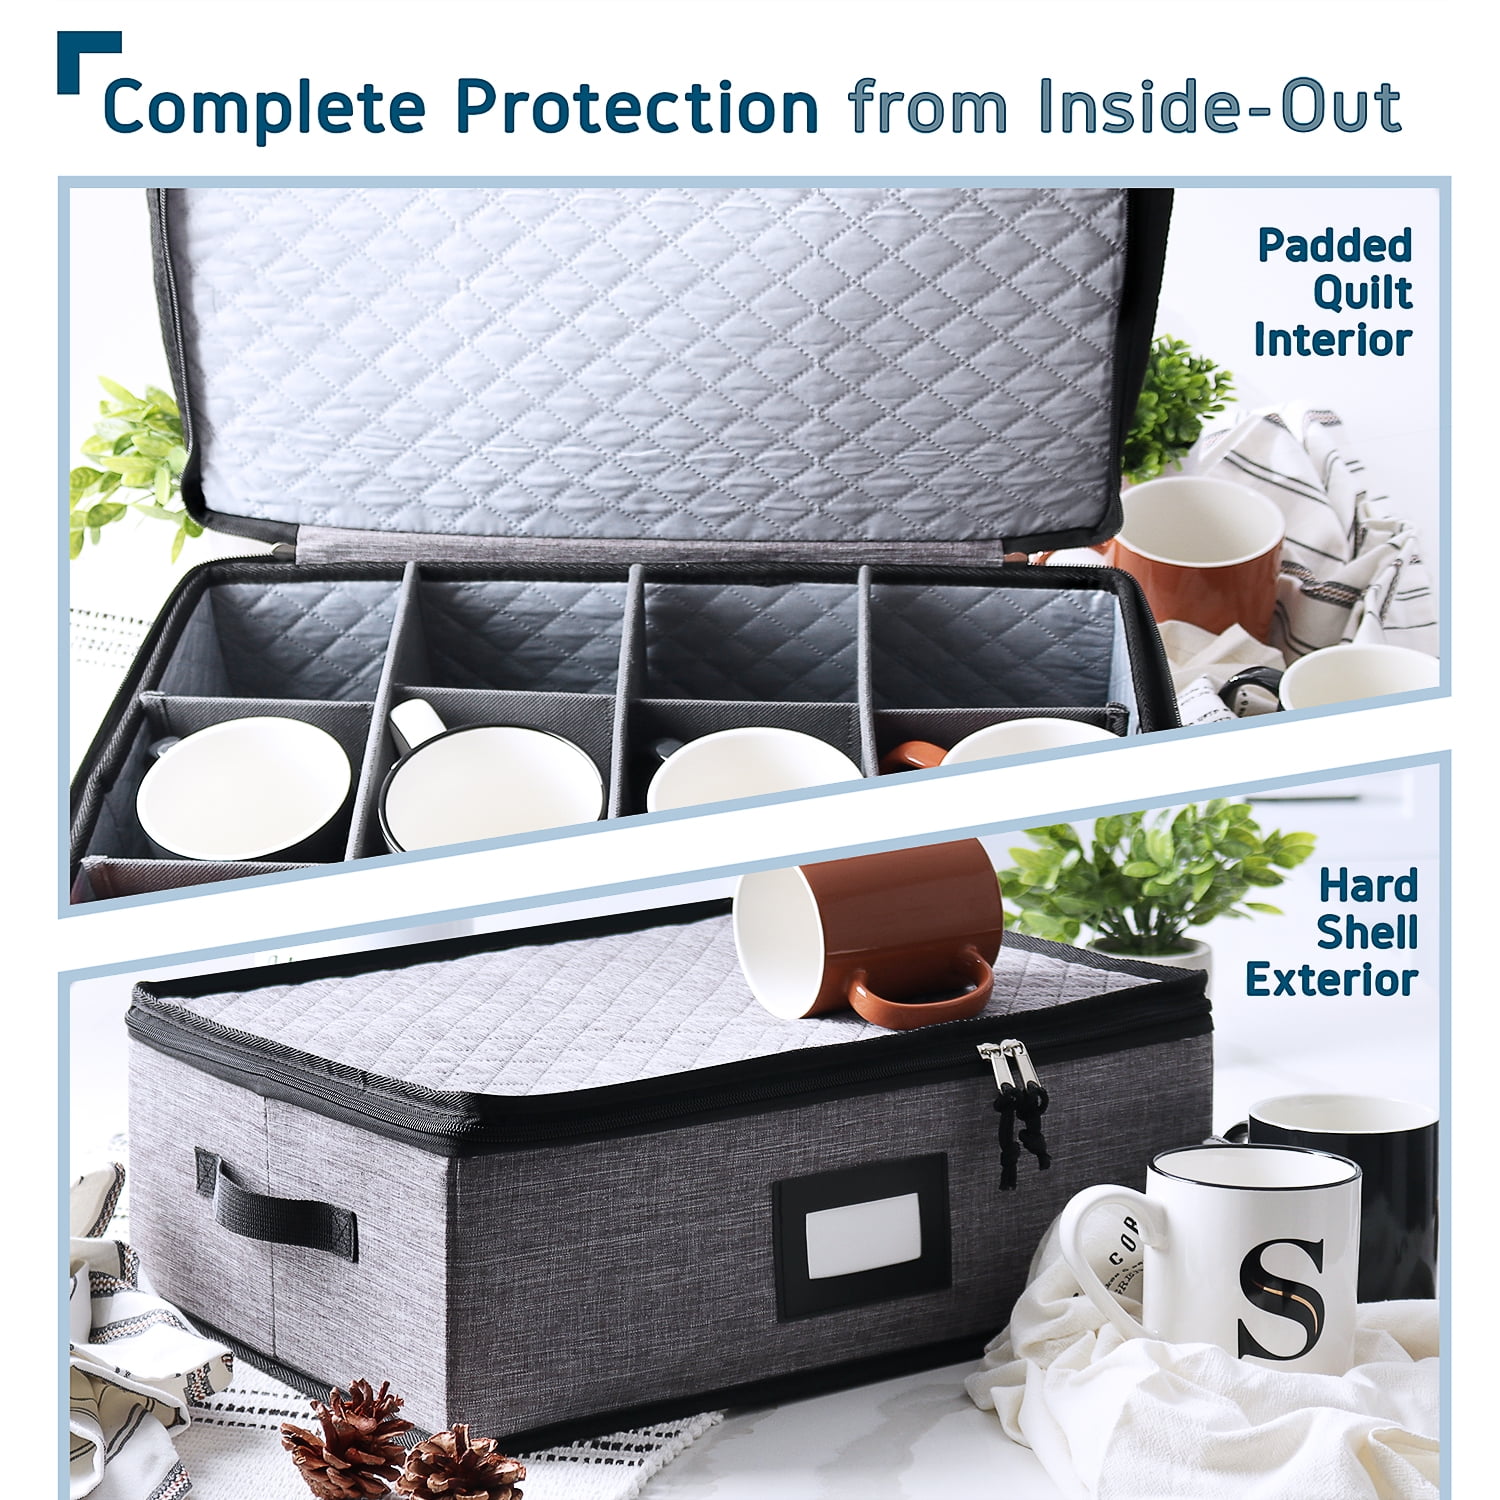 Padded Nesting Cookware Storage/Carry Case